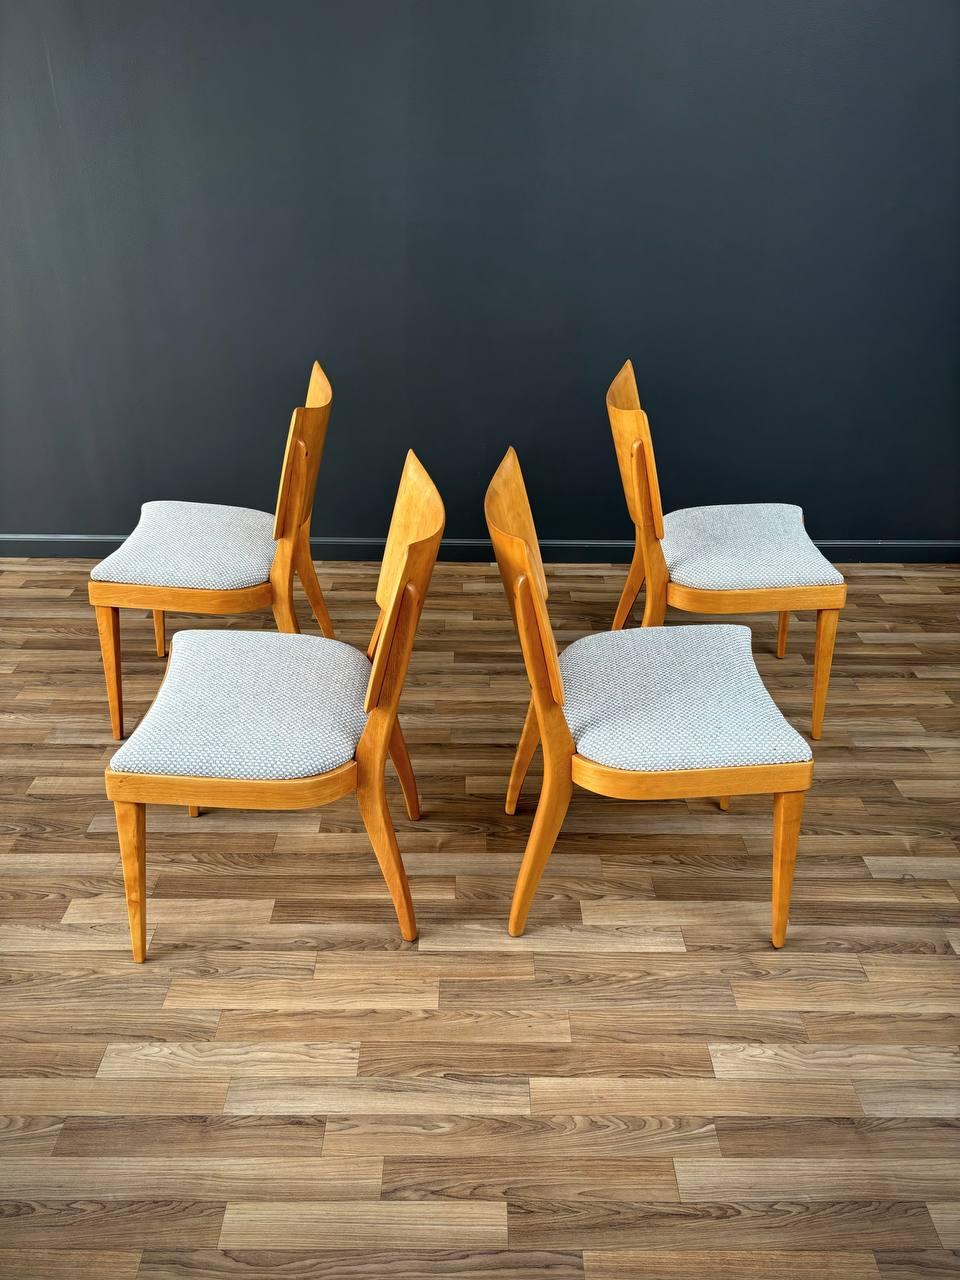 Set of 4 Mid-Century Modern Dining Chairs by Heywood Wakefield In Excellent Condition For Sale In Los Angeles, CA